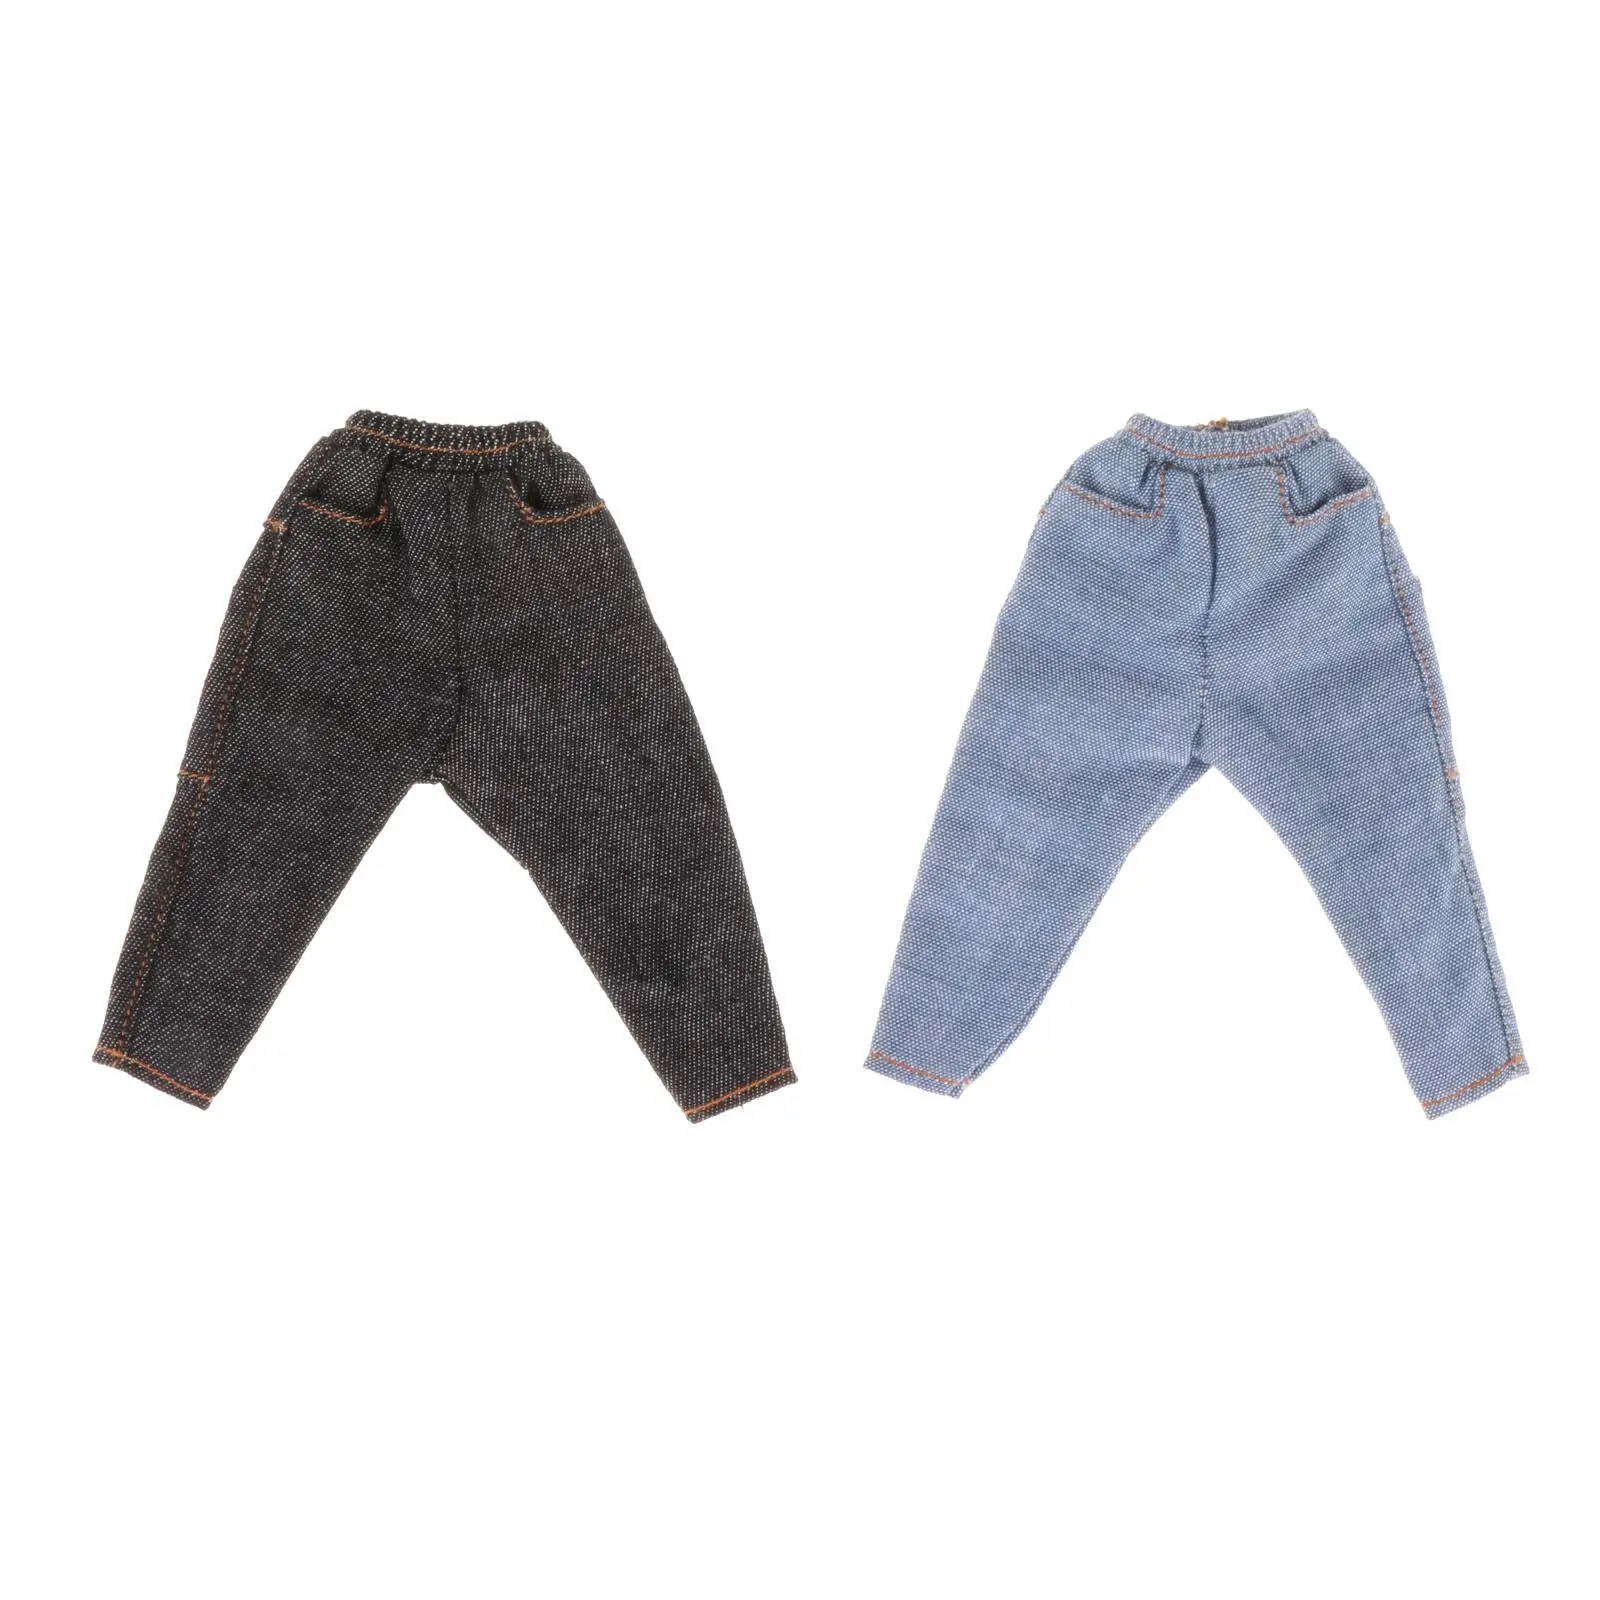 

1/6 Men Denim Pants Miniature Clothing Handmade Doll Clothes Accs for 12 inch Doll Model Male Soldiers Figures Dress up